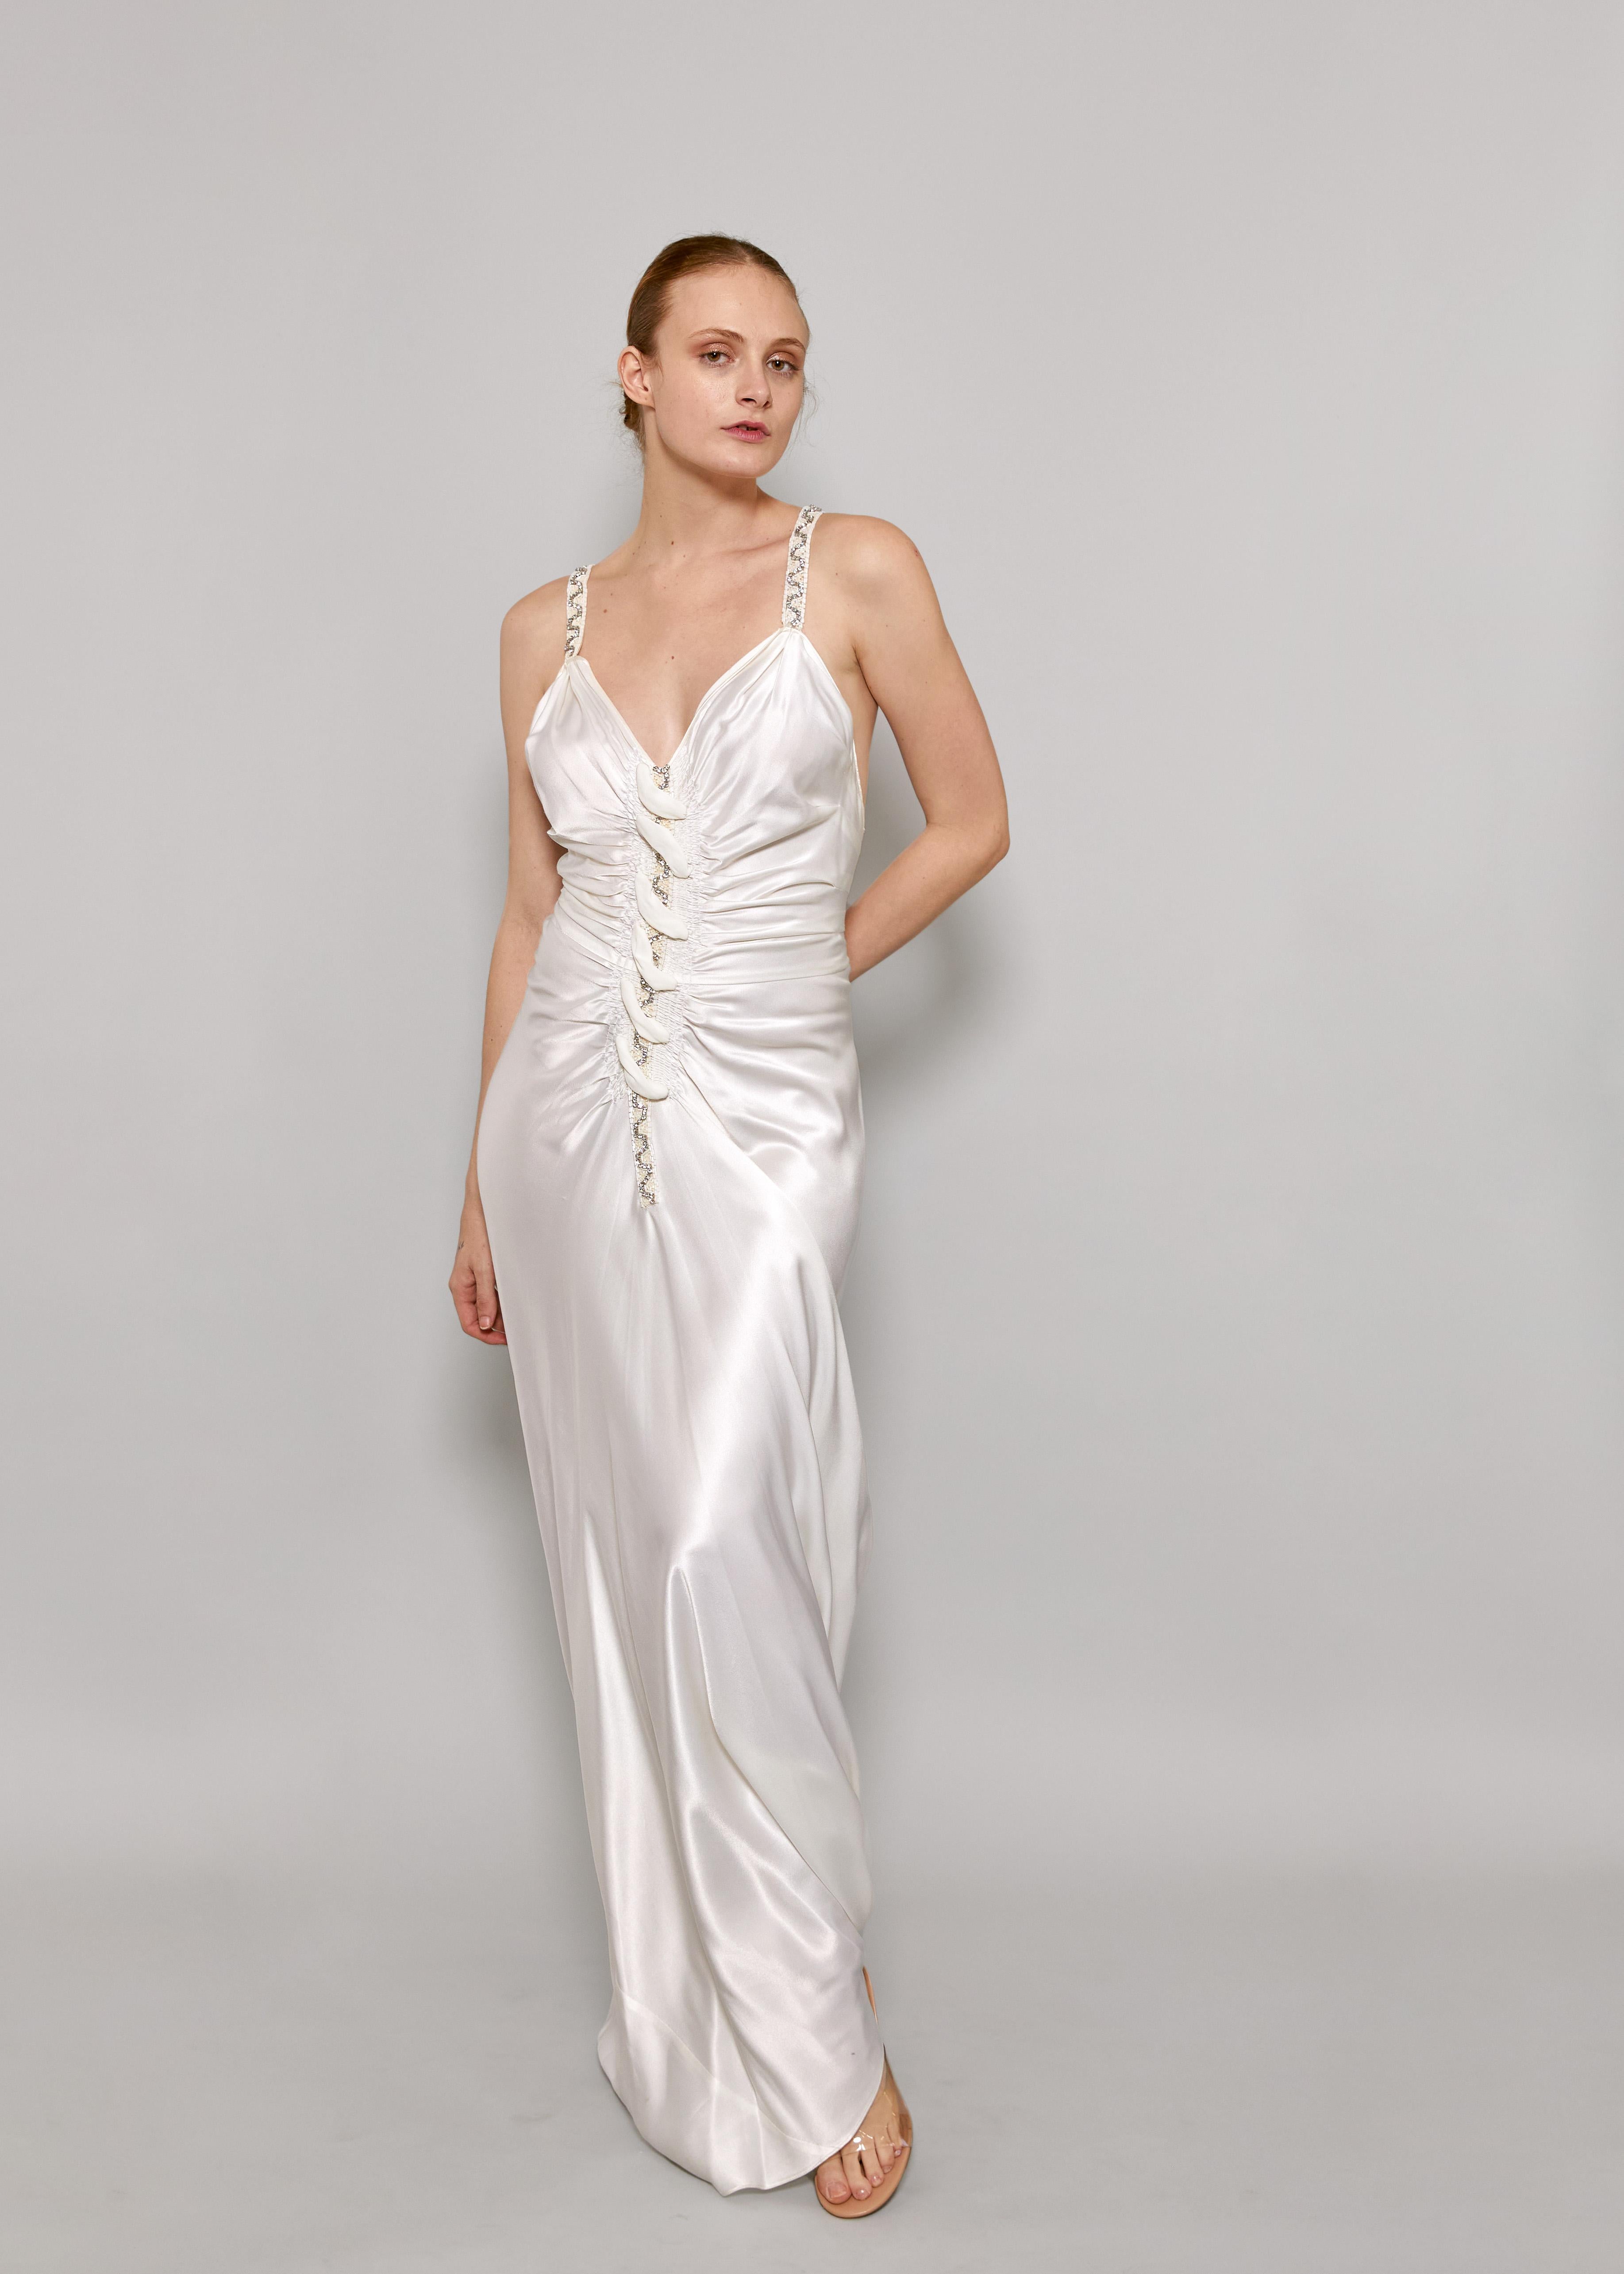 Be the center of attention in the exquisite John Galliano S/S 2006 White Satin Bias Cut Dress. Elegant rhinestone and beaded straps add a touch of glamour to the sleek ruched front design. Made from luxurious white satin, this dress will make you